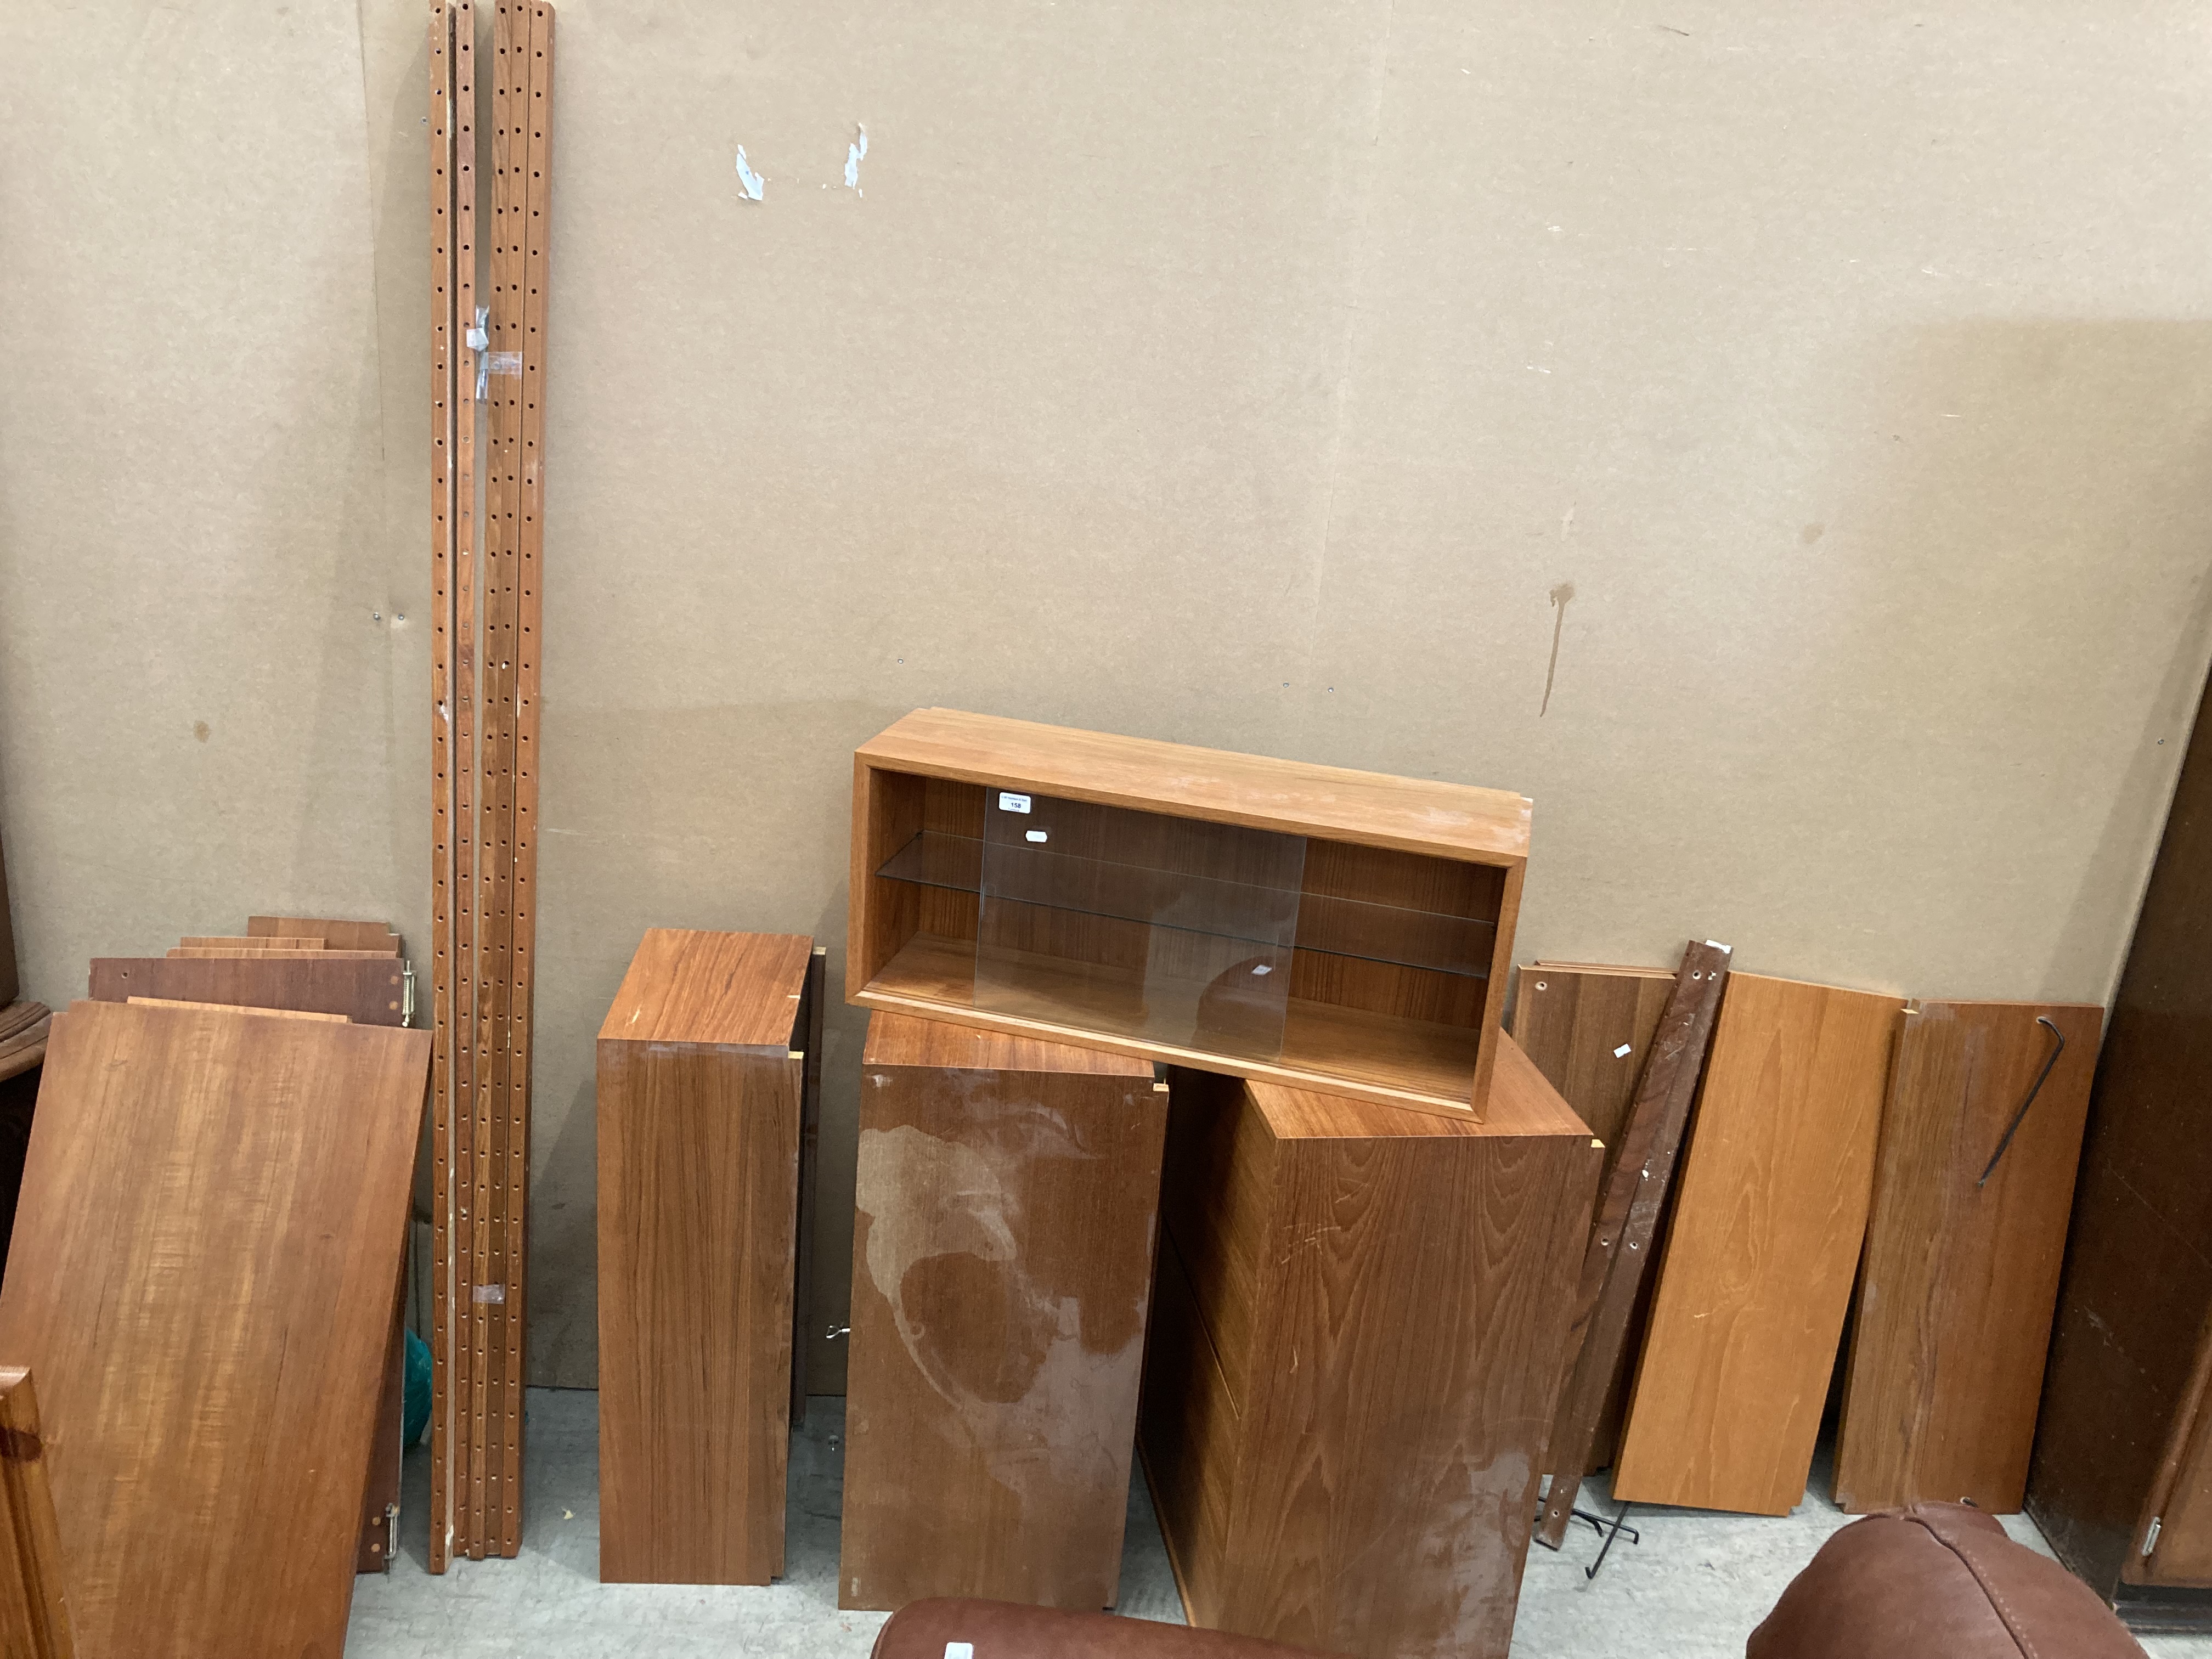 A mid Twentieth Century teak wall mounting unit - sold dismantled and as seen - no image showing it